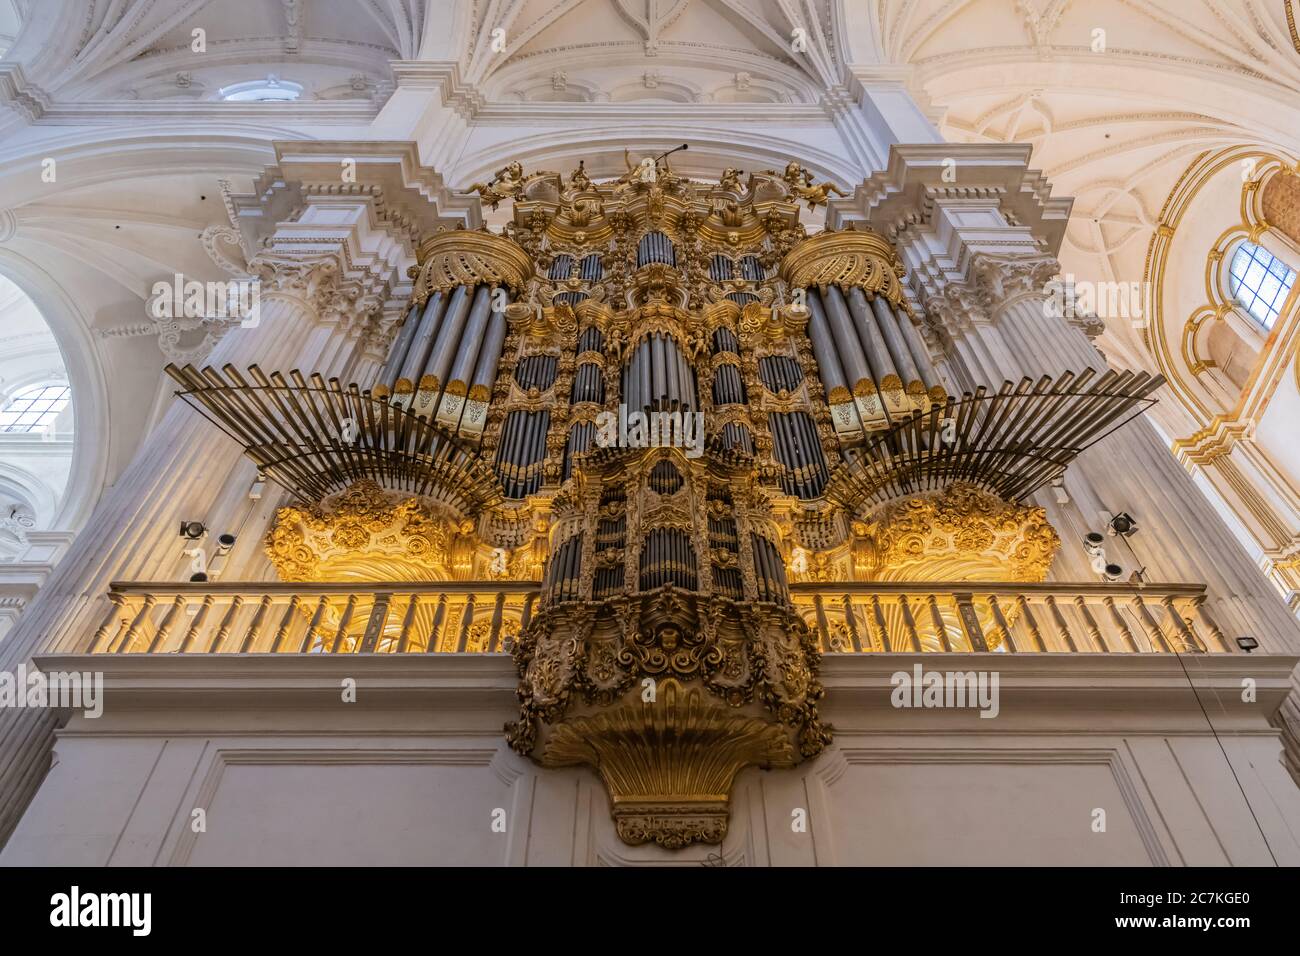 The monumental facade of Leonardo Ávila's baroque 'Epistle' pipe organ in Granada Cathedral. Completed in 1749 it is in an Iberian baroque style. Stock Photo